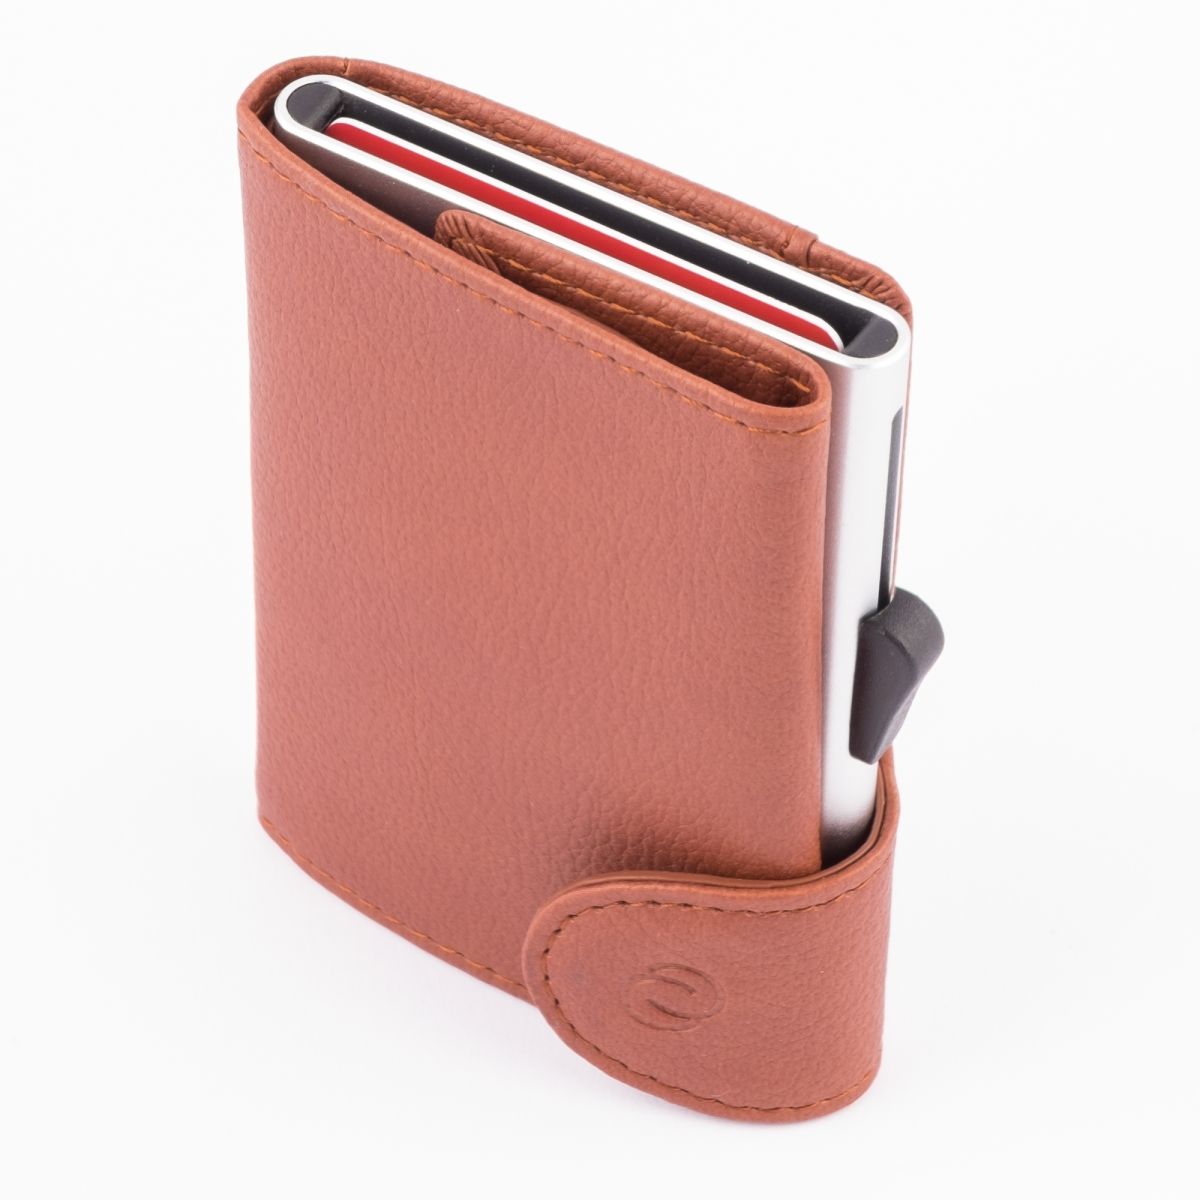 C-Secure Aluminum Card Holder with PU Leather - Light Brown